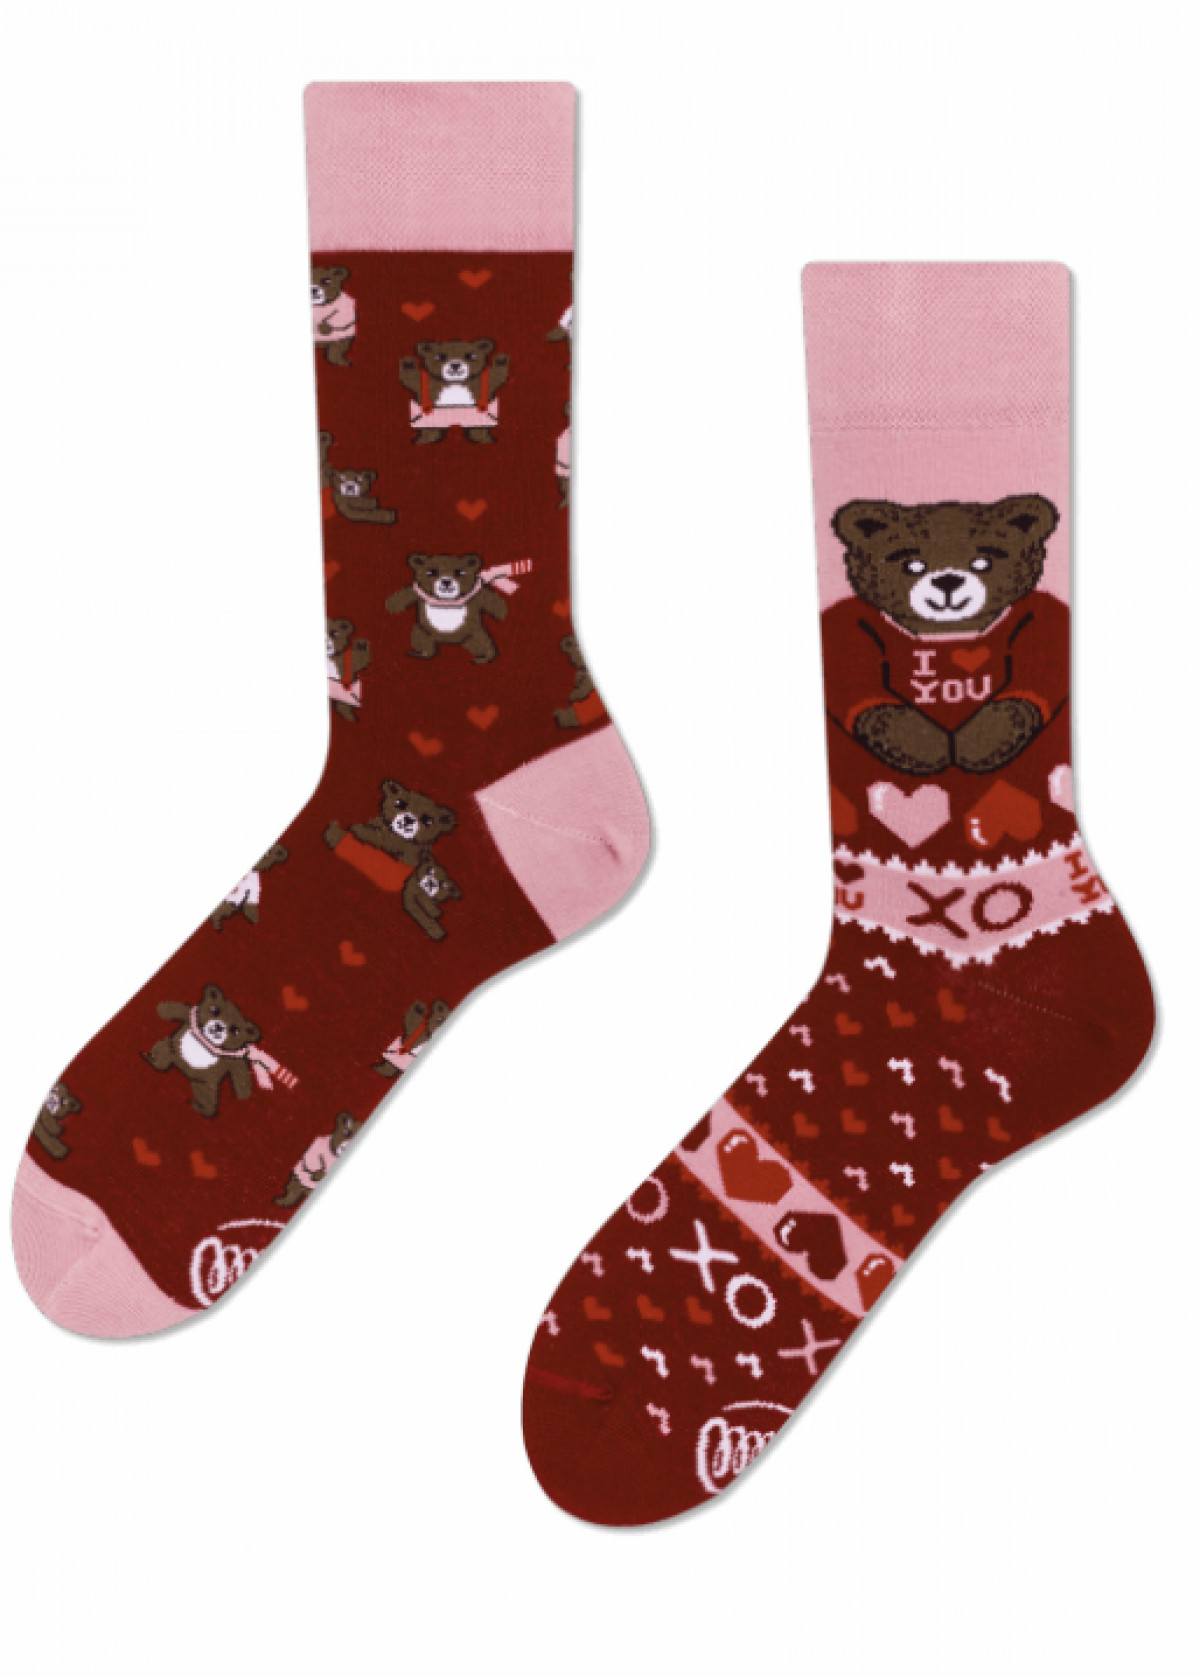 Chaussettes Many Mornings - Love Teddy - Boutique Toup'tibou - photo 8